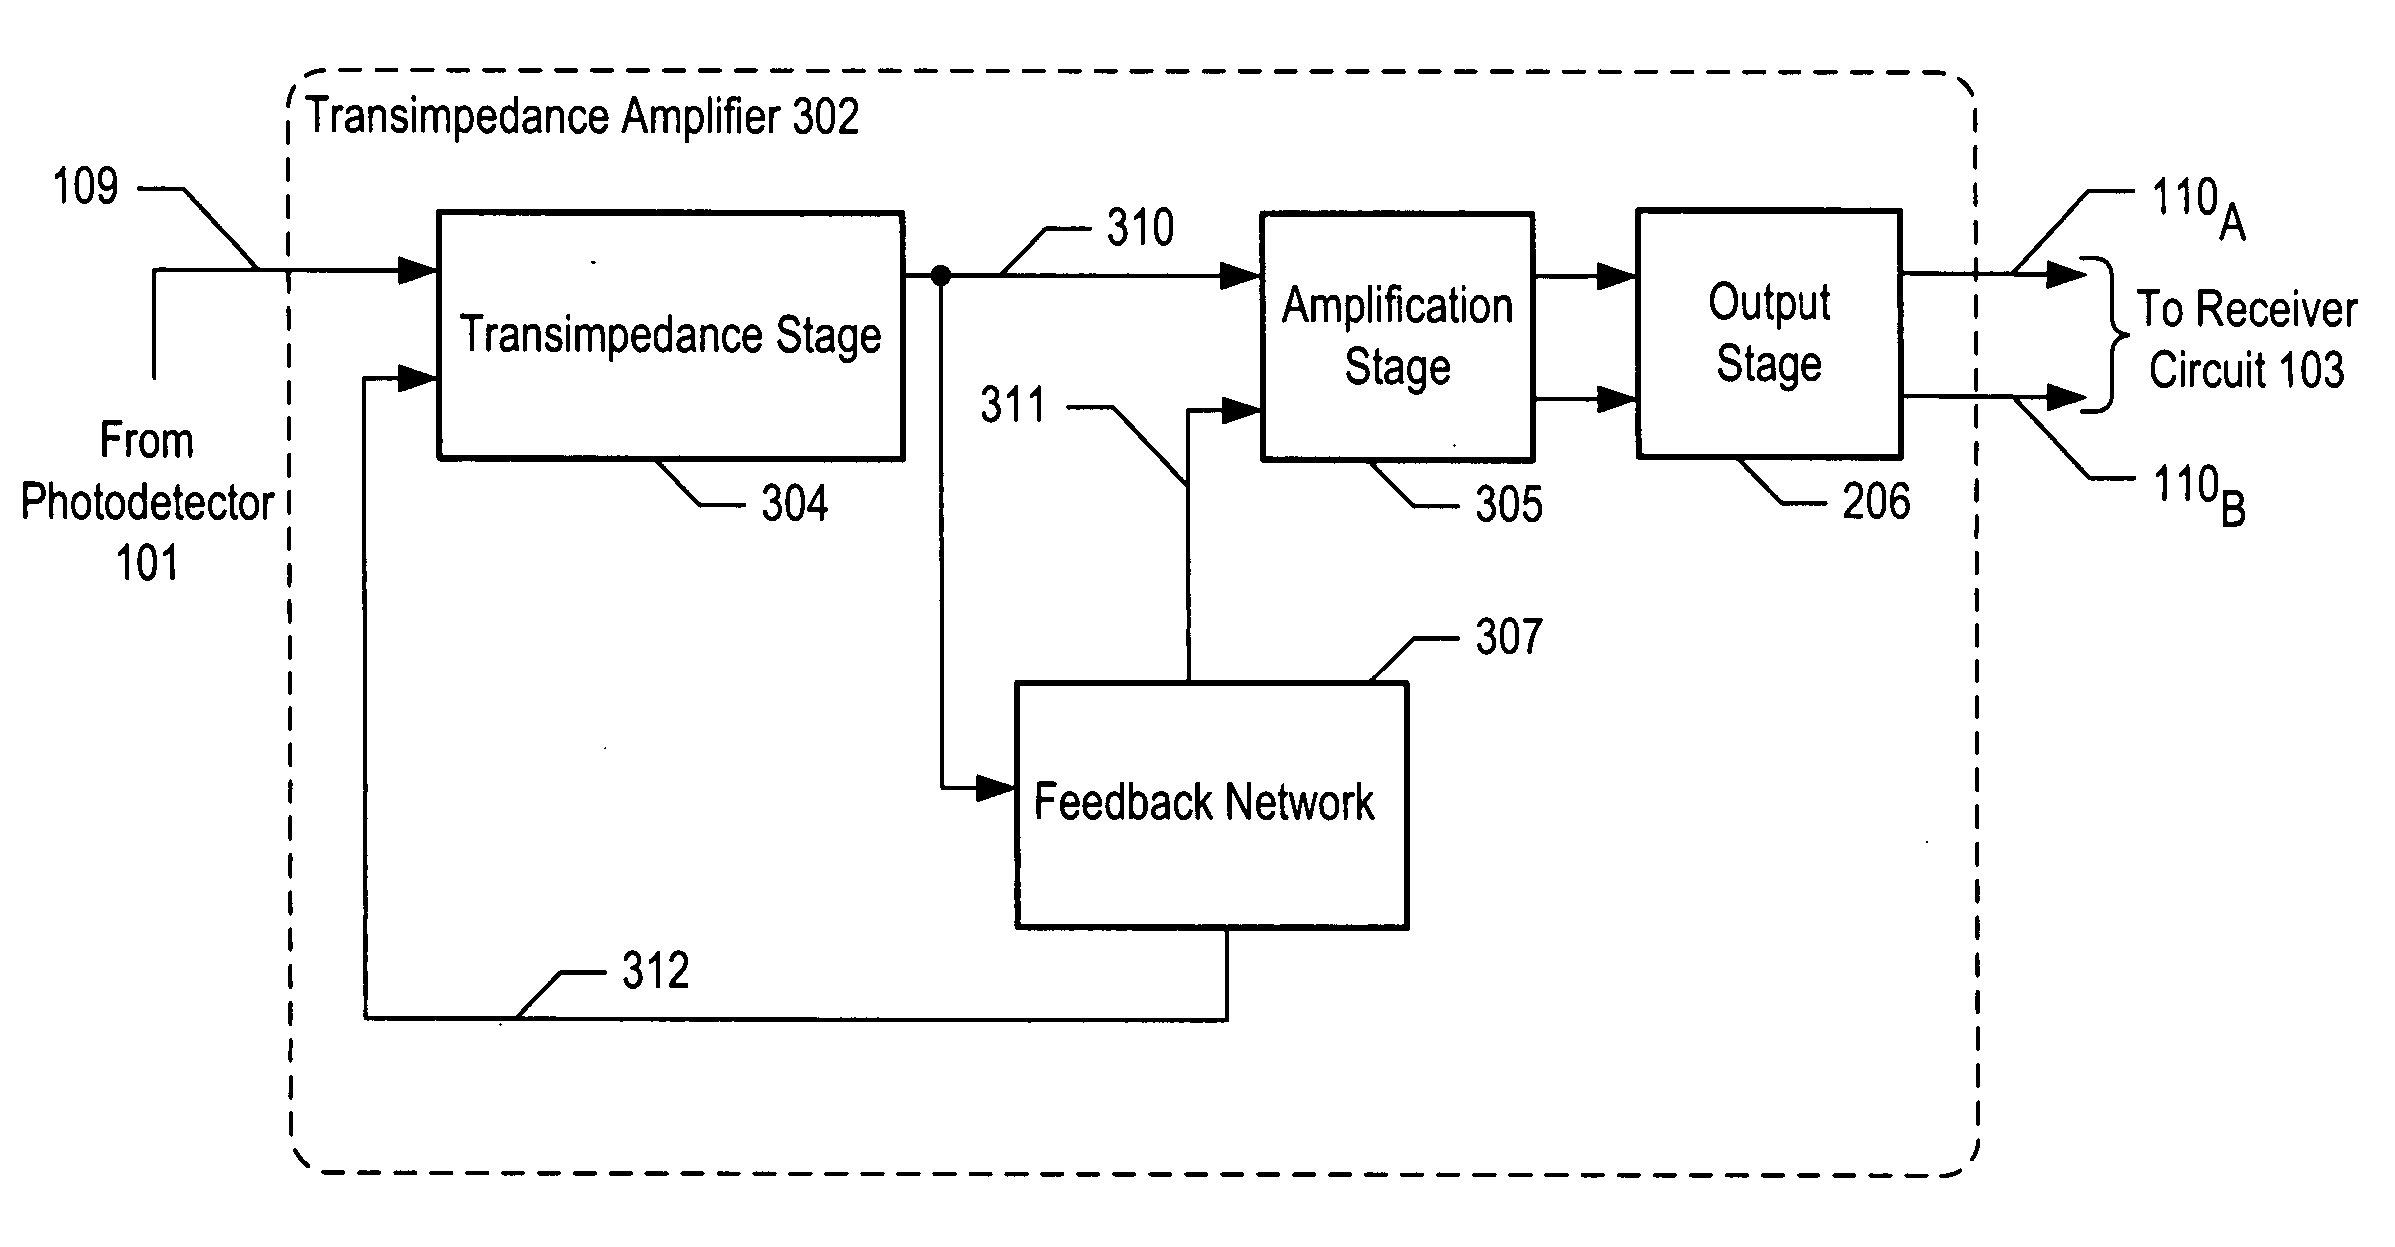 Process and temperature-compensated transimpedance amplifier